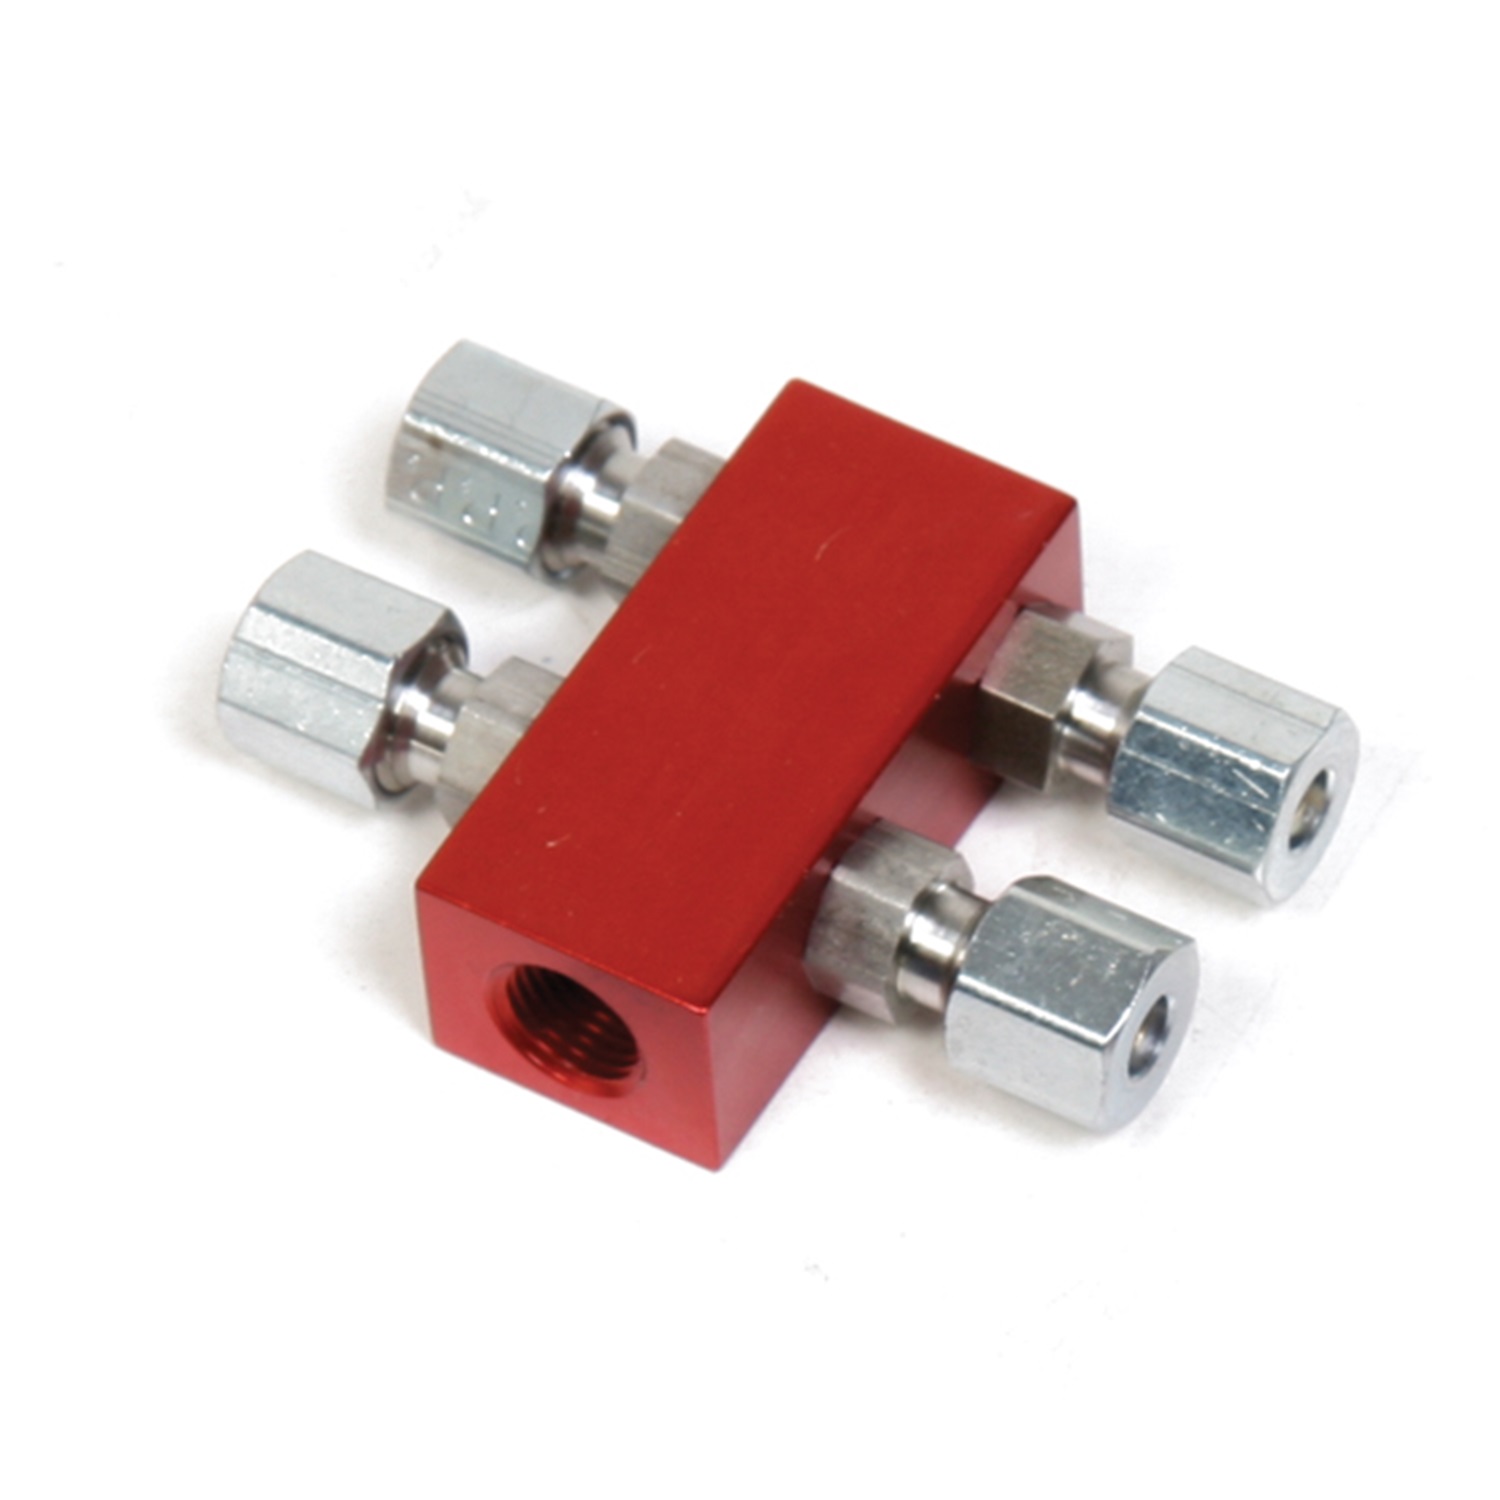 Nitrous Oxide Distribution Block, NOS Distribution Blocks, 1 IN 4 OUT DIST BLOCK (INC COMP FITTINGS) RED